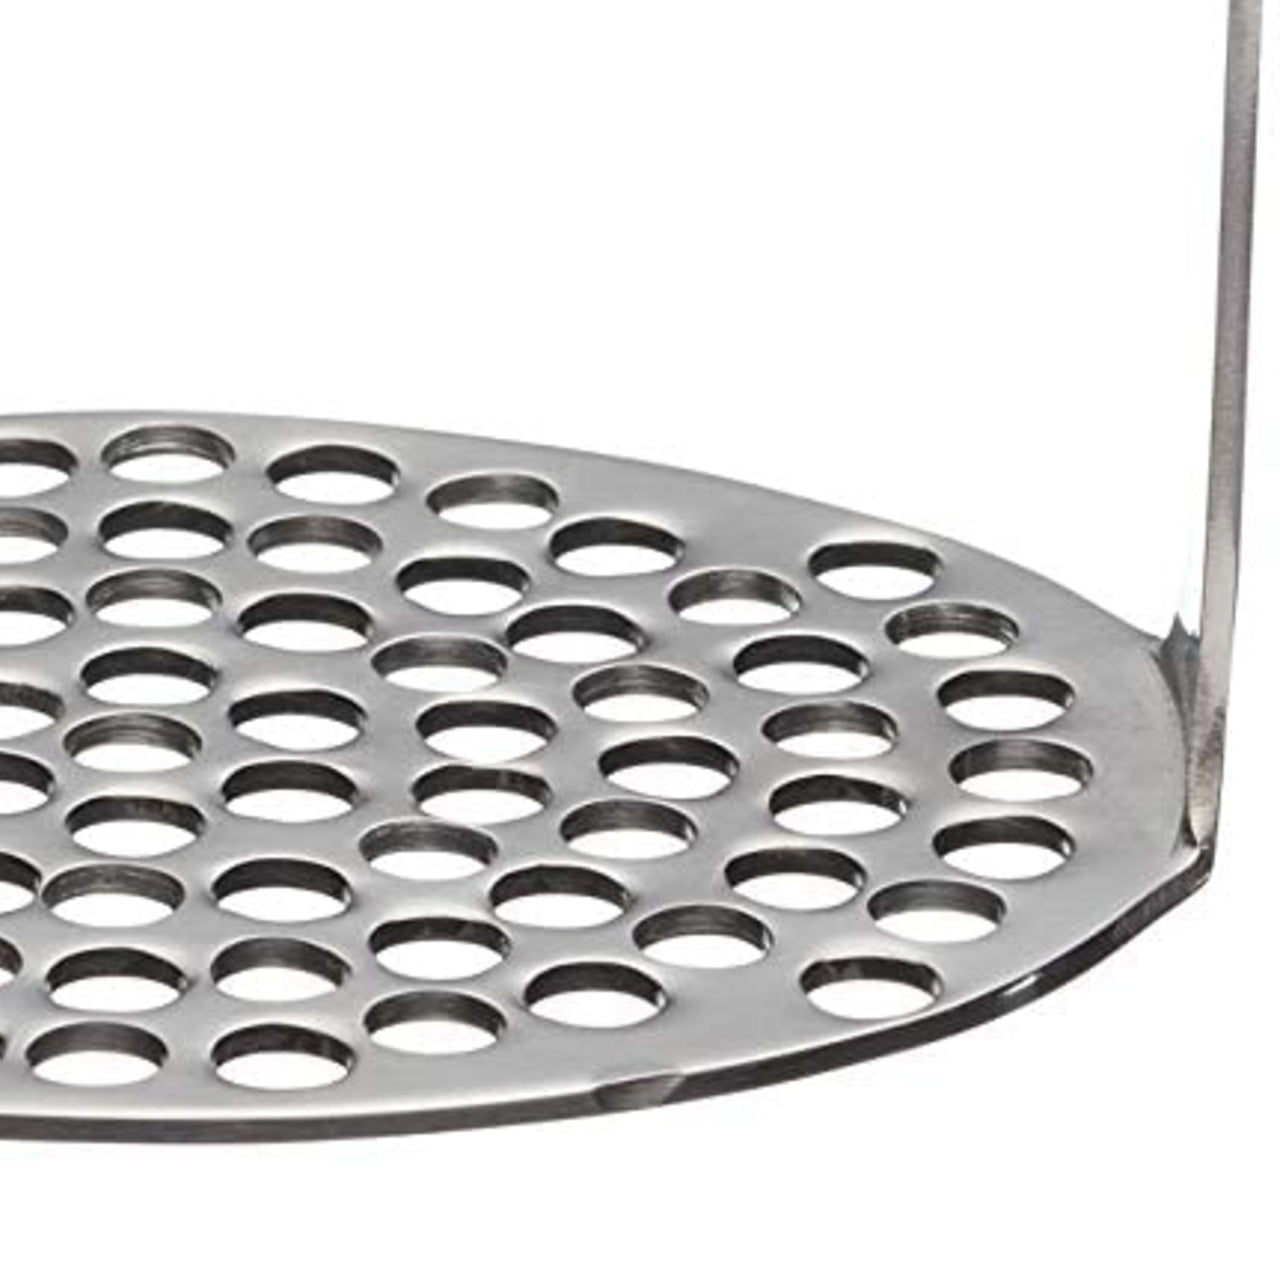 Stainless Steel Oval Shaped Potato Masher